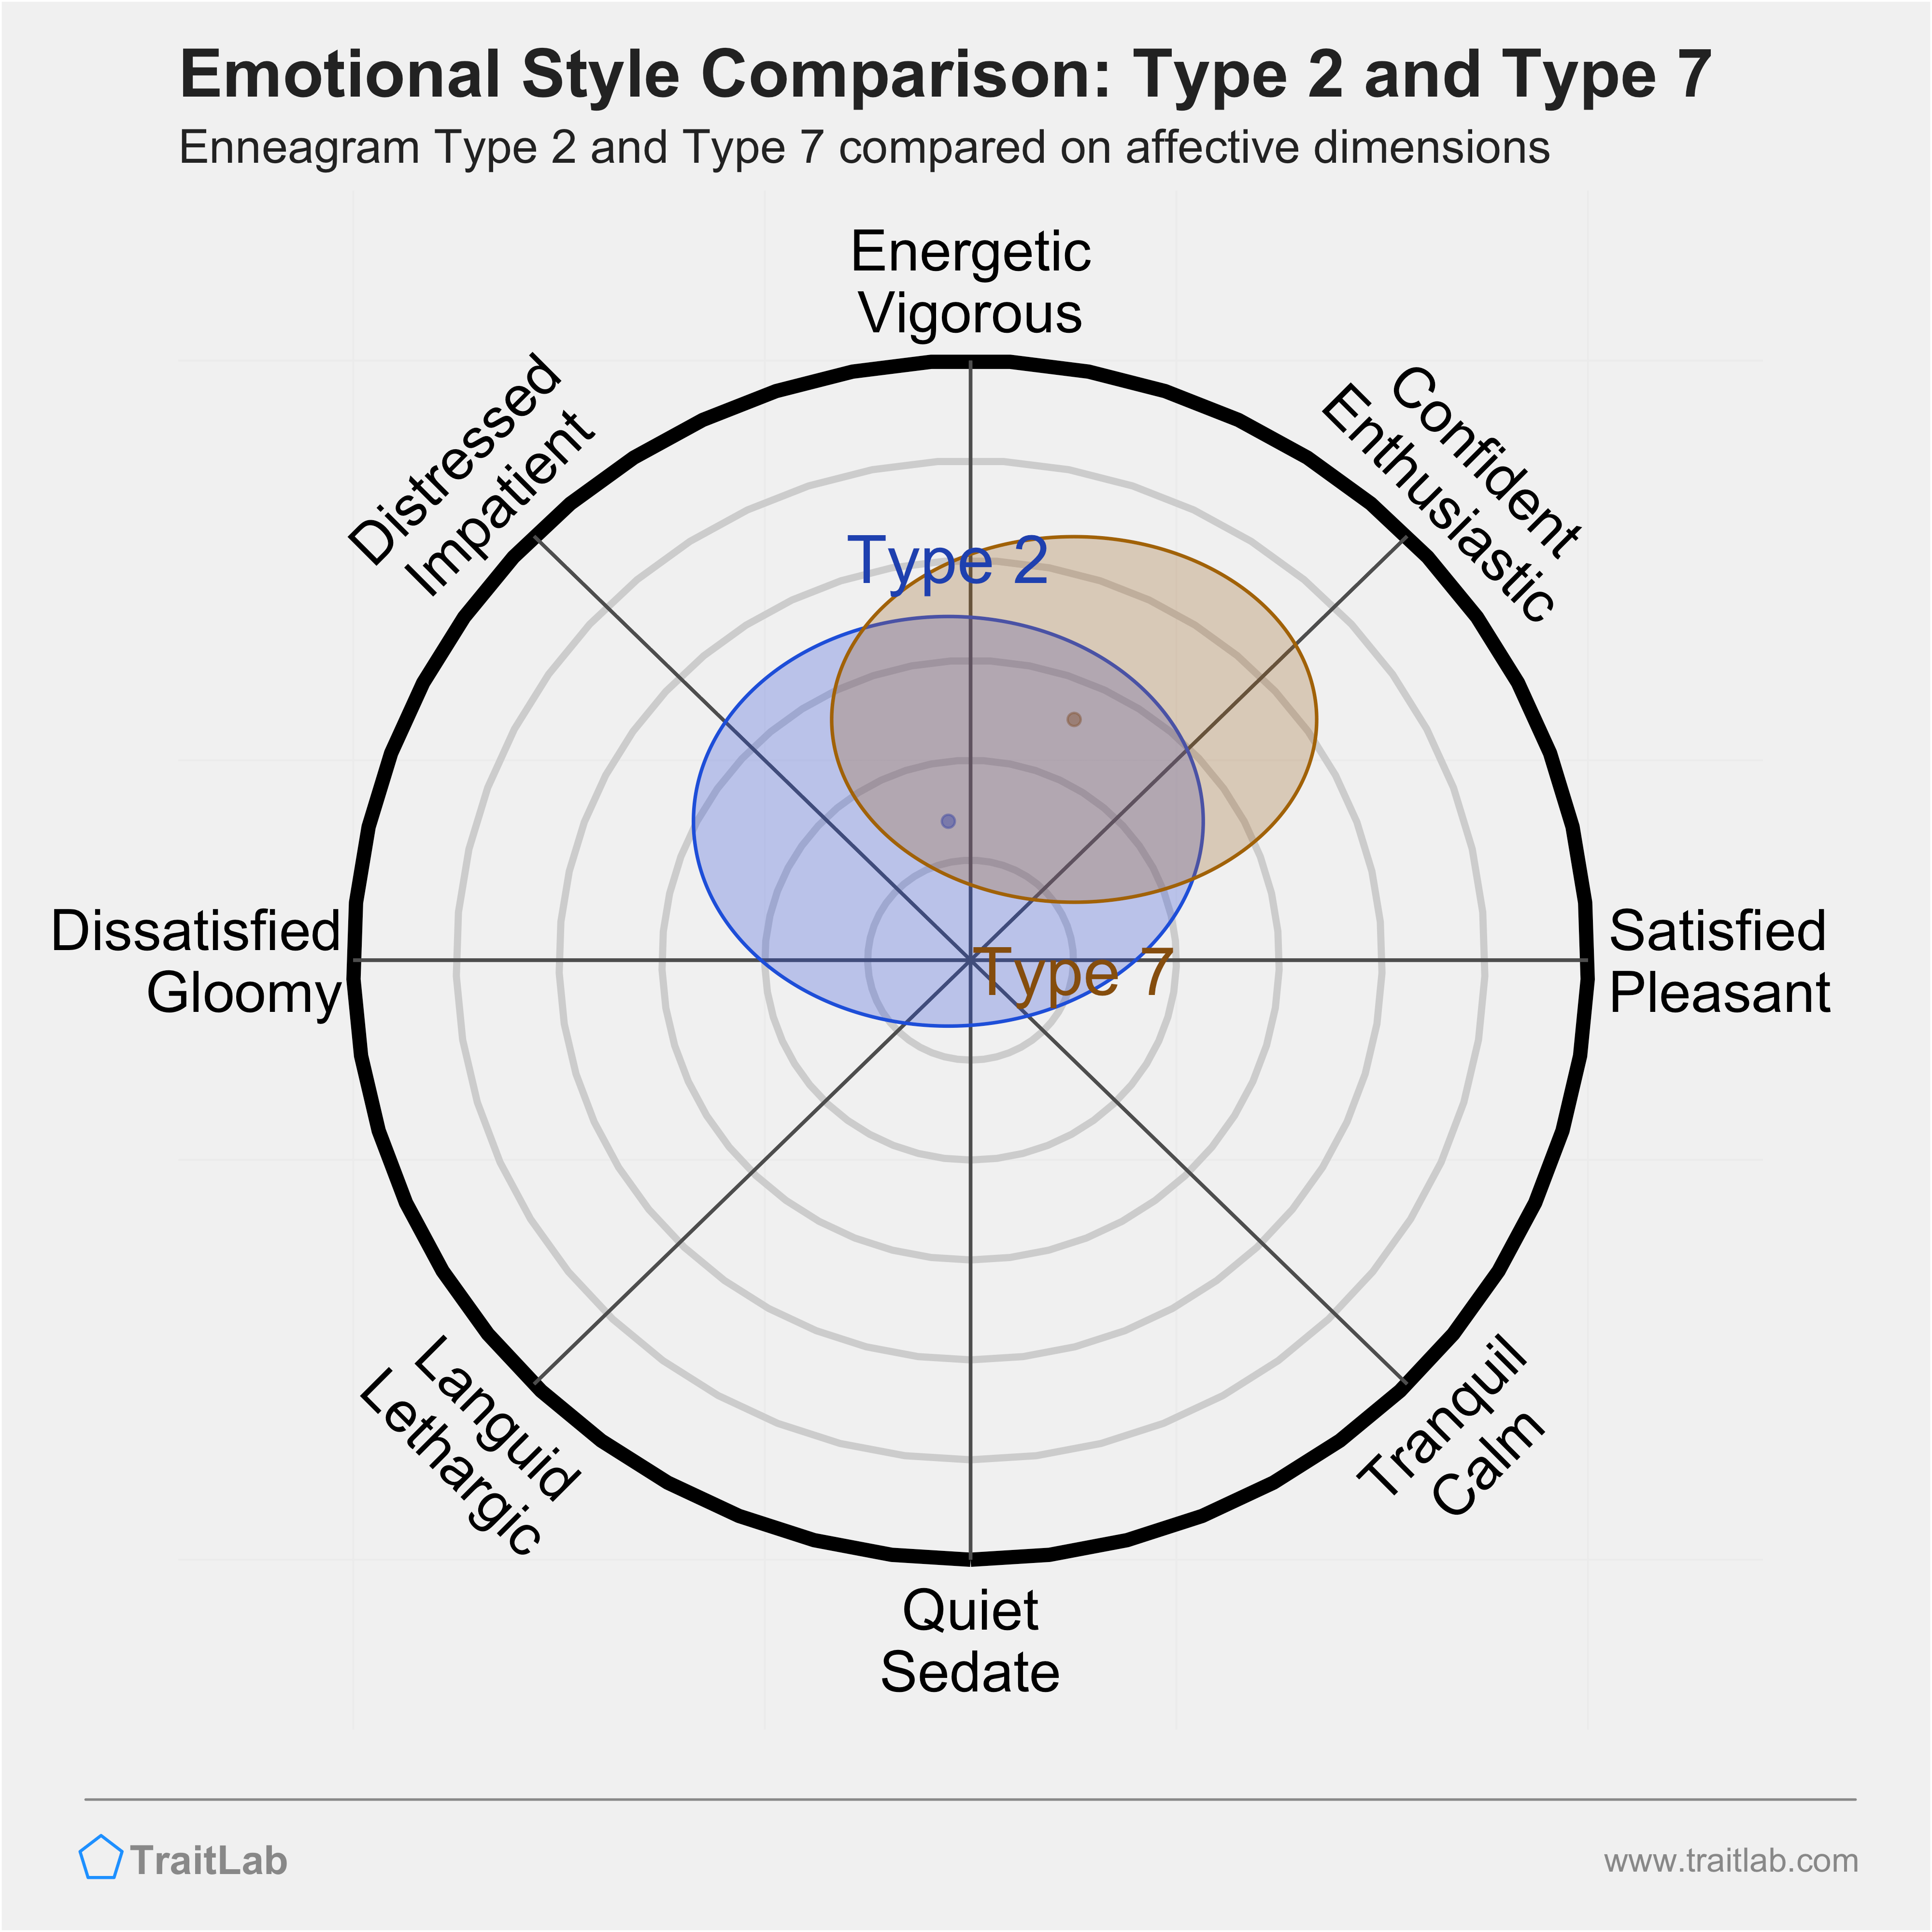 Type 2 and Type 7 comparison across emotional (affective) dimensions